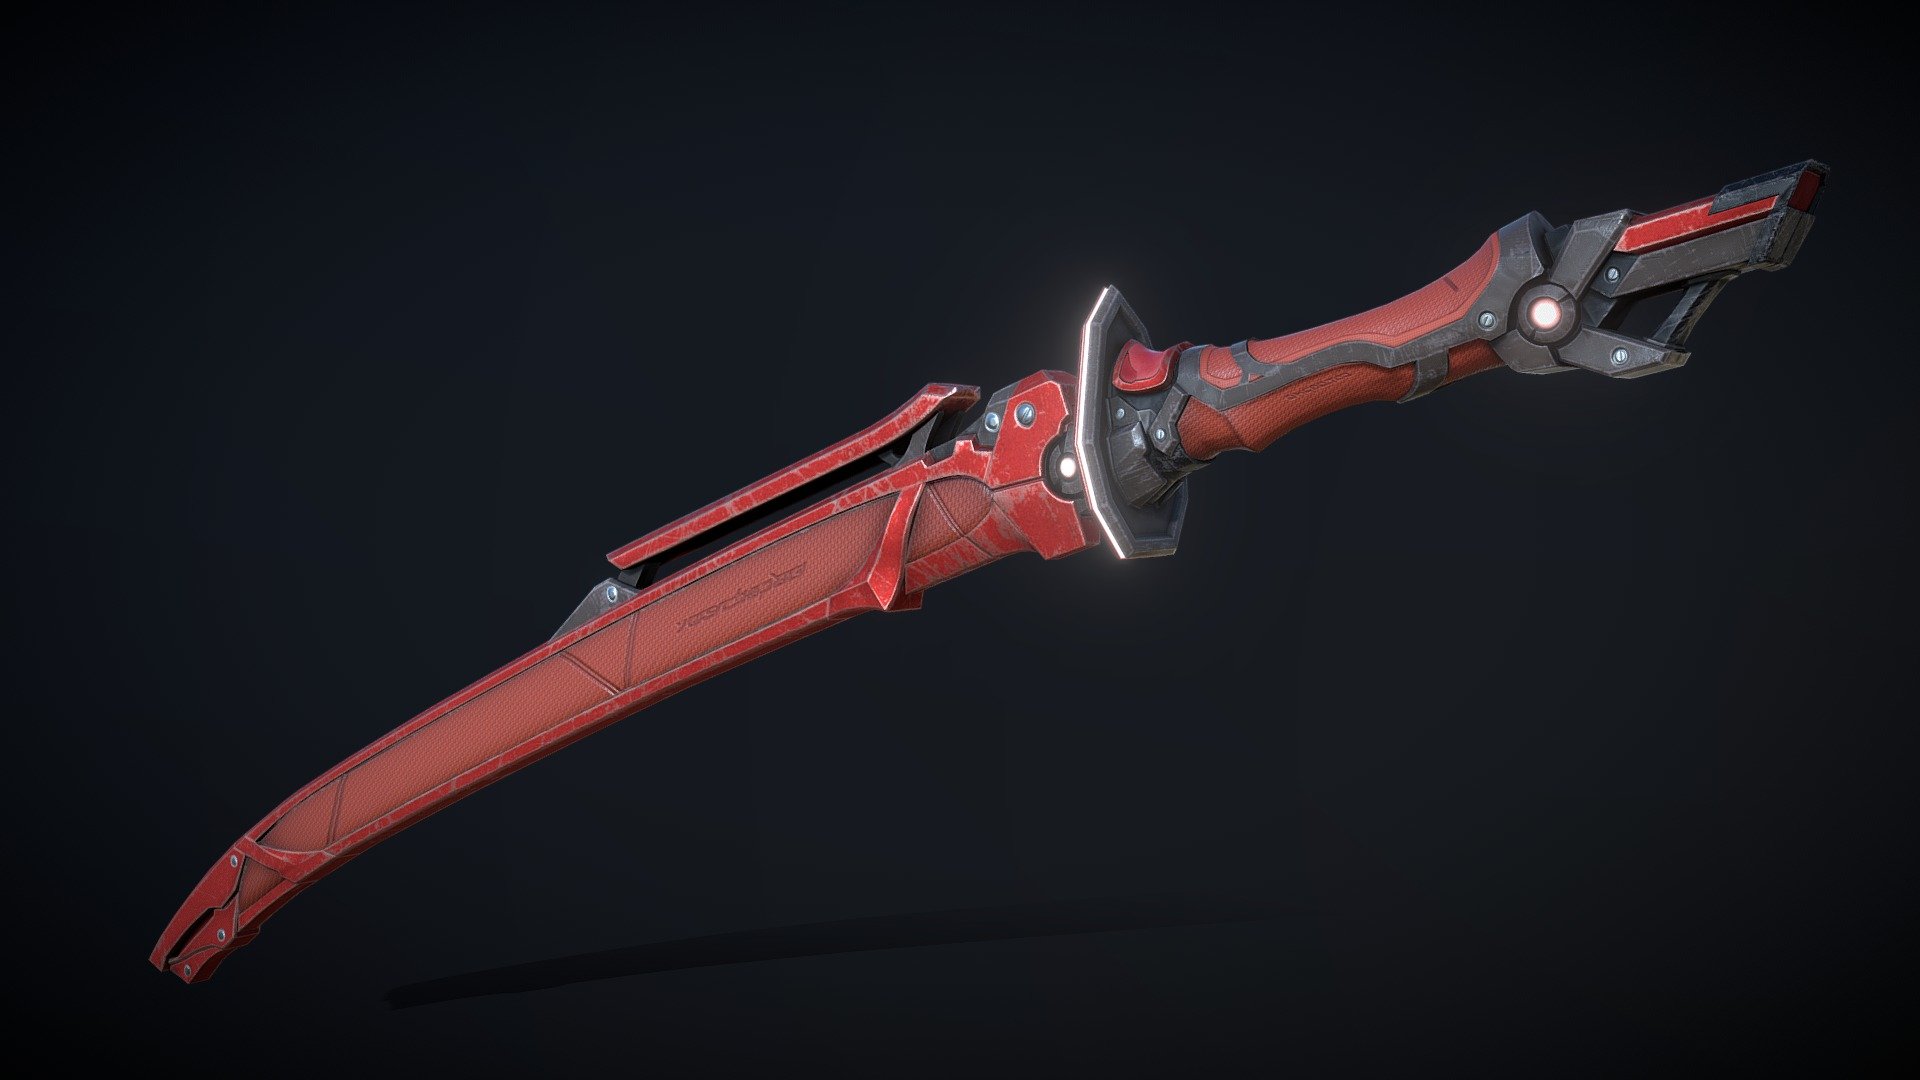 A sci-fi Katana sword with a seathe.
Based on several designs from Spark621, with a lot of modifications such as the glowing edge or the tilted seathe.
For a similar design check this other scifi weapon: https://sketchfab.com/3d-models/the-cracker-e1e5f3fd879c4eb28c317fa523b62692 - Carmine Katana - 3D model by Typhen 3d model